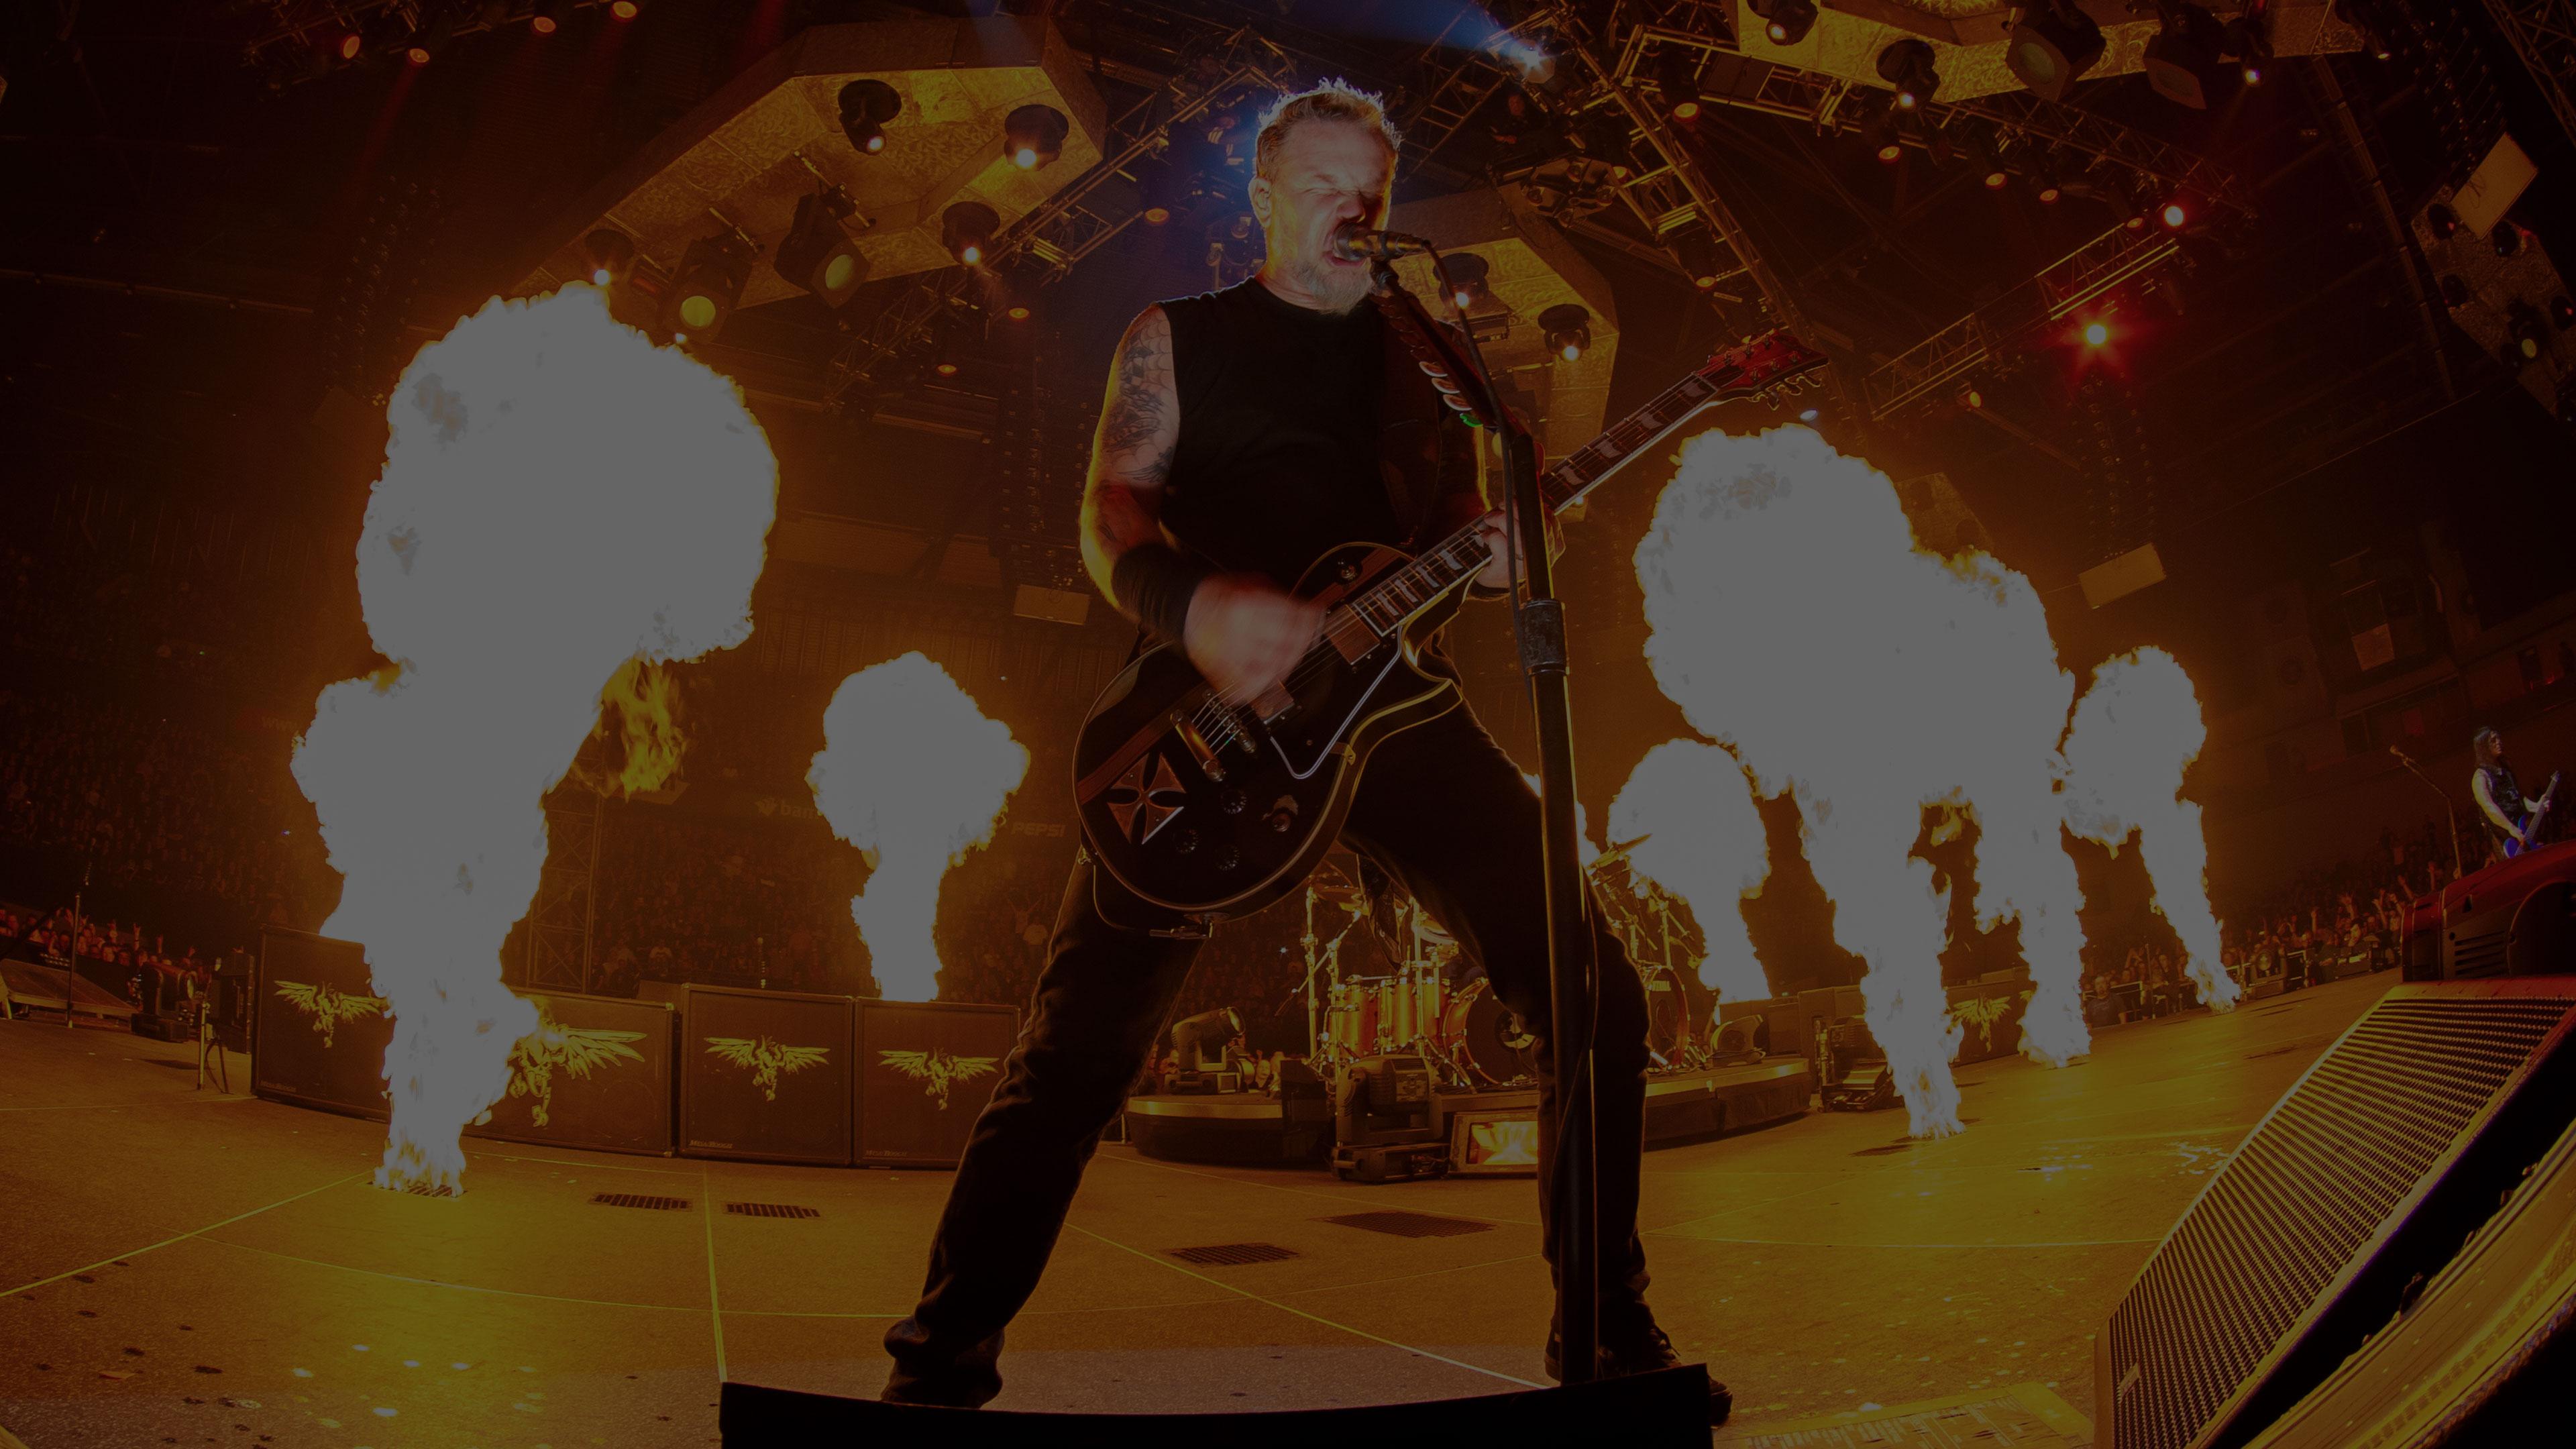 Metallica at Ahoy in Rotterdam, Netherlands on March 30, 2009